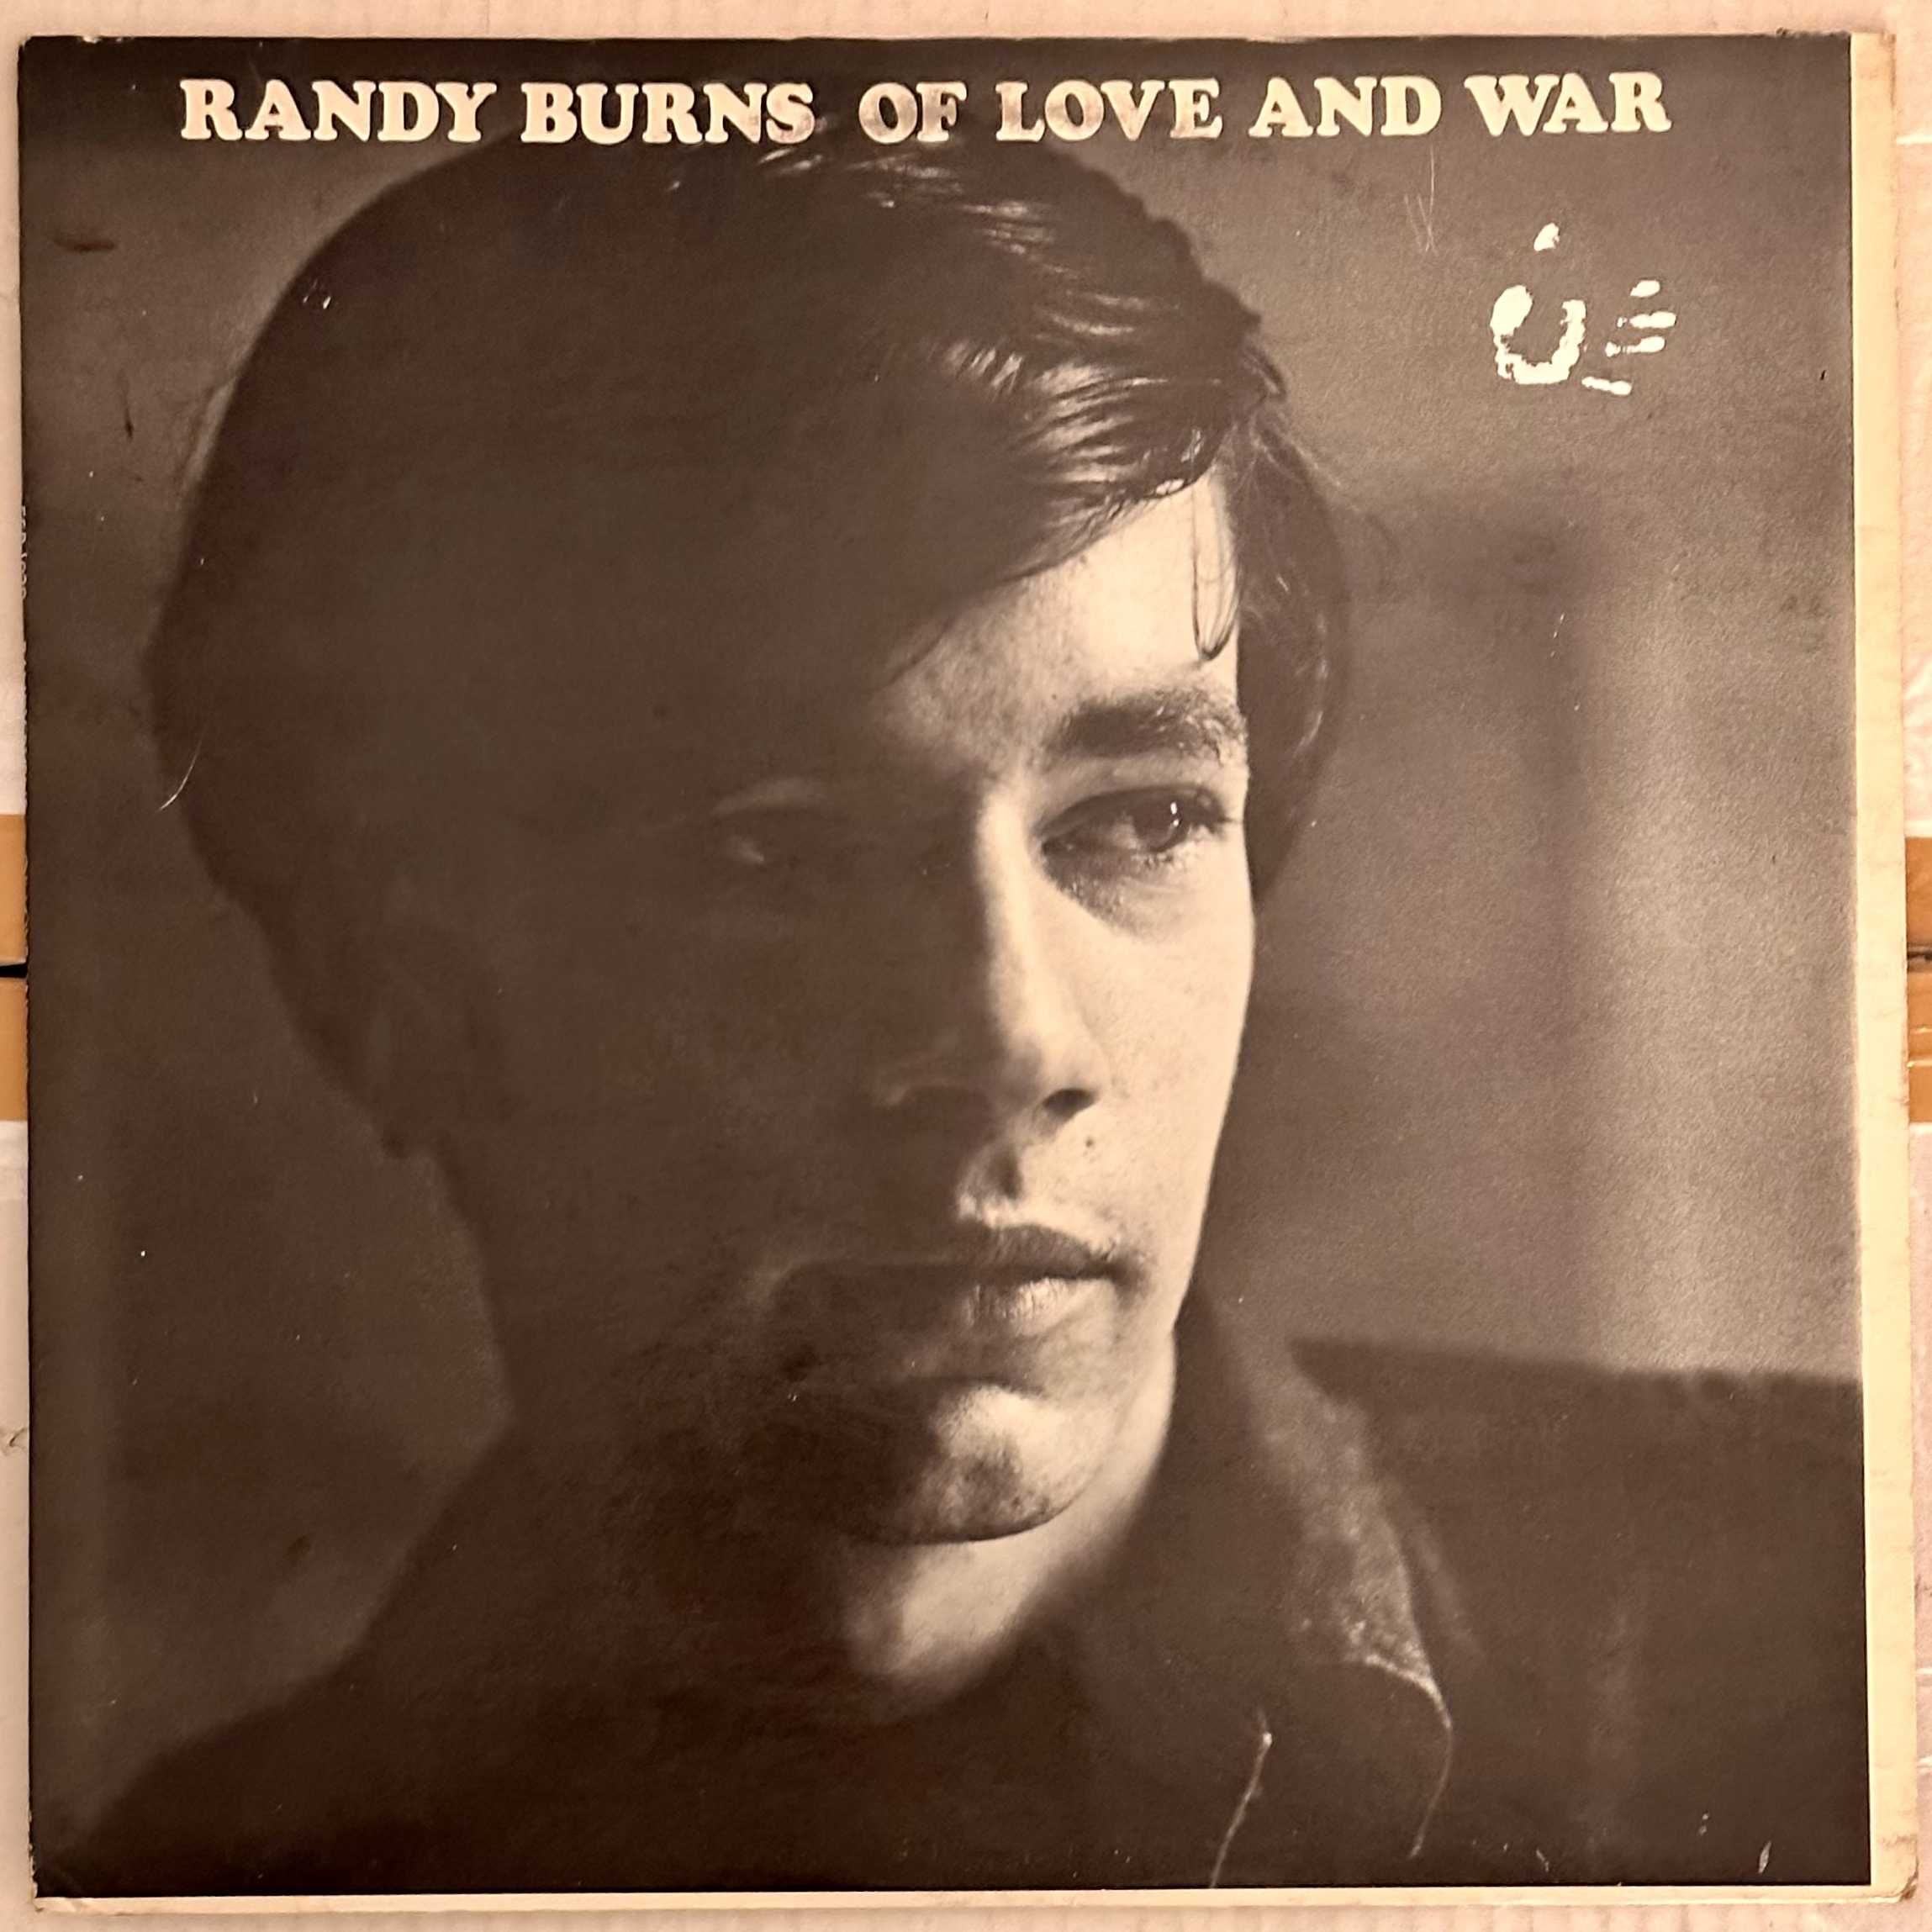 Of Love and War by Randy Burns